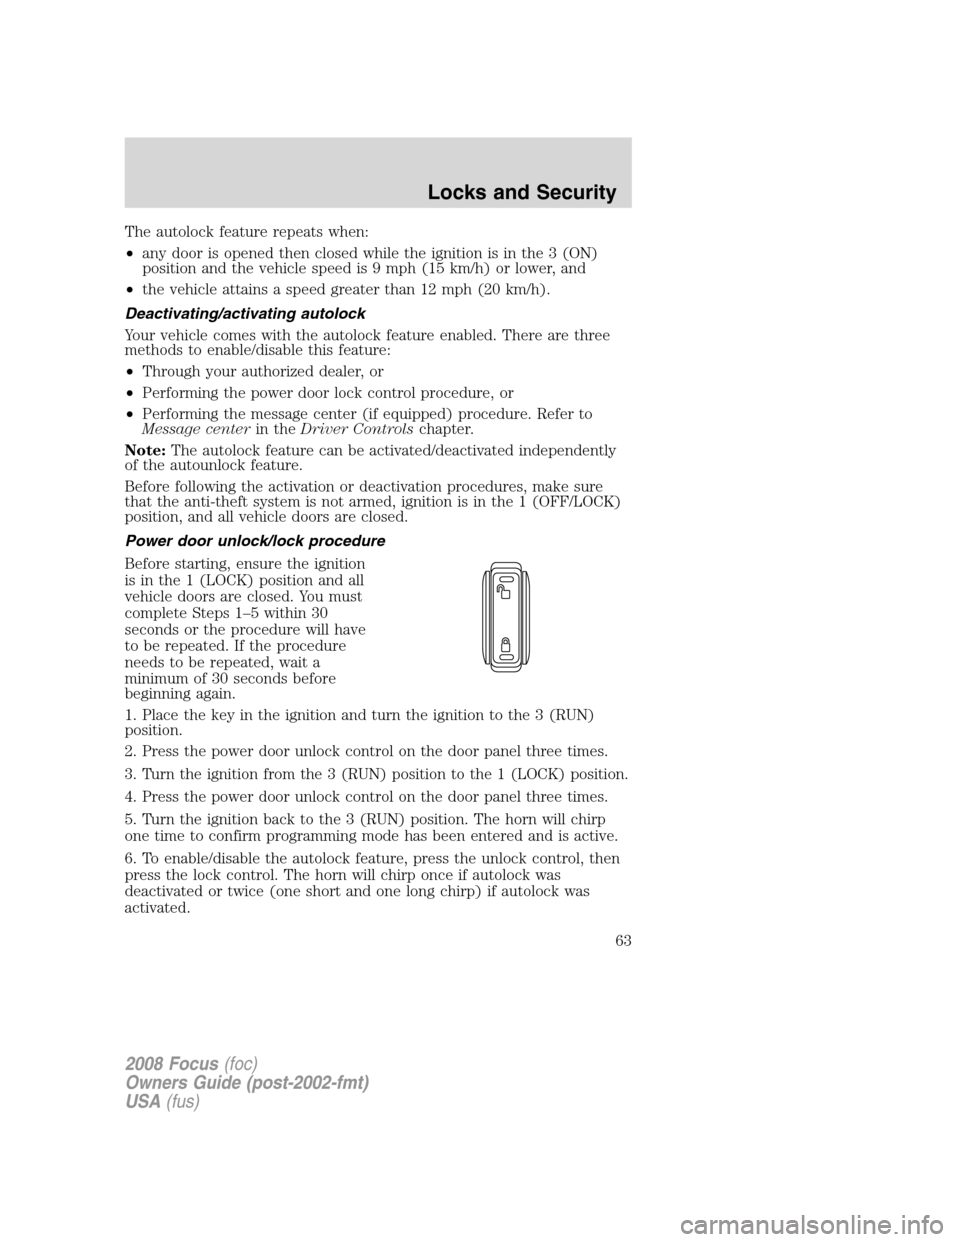 FORD FOCUS 2008 2.G Repair Manual The autolock feature repeats when:
•any door is opened then closed while the ignition is in the 3 (ON)
position and the vehicle speed is 9 mph (15 km/h) or lower, and
•the vehicle attains a speed 